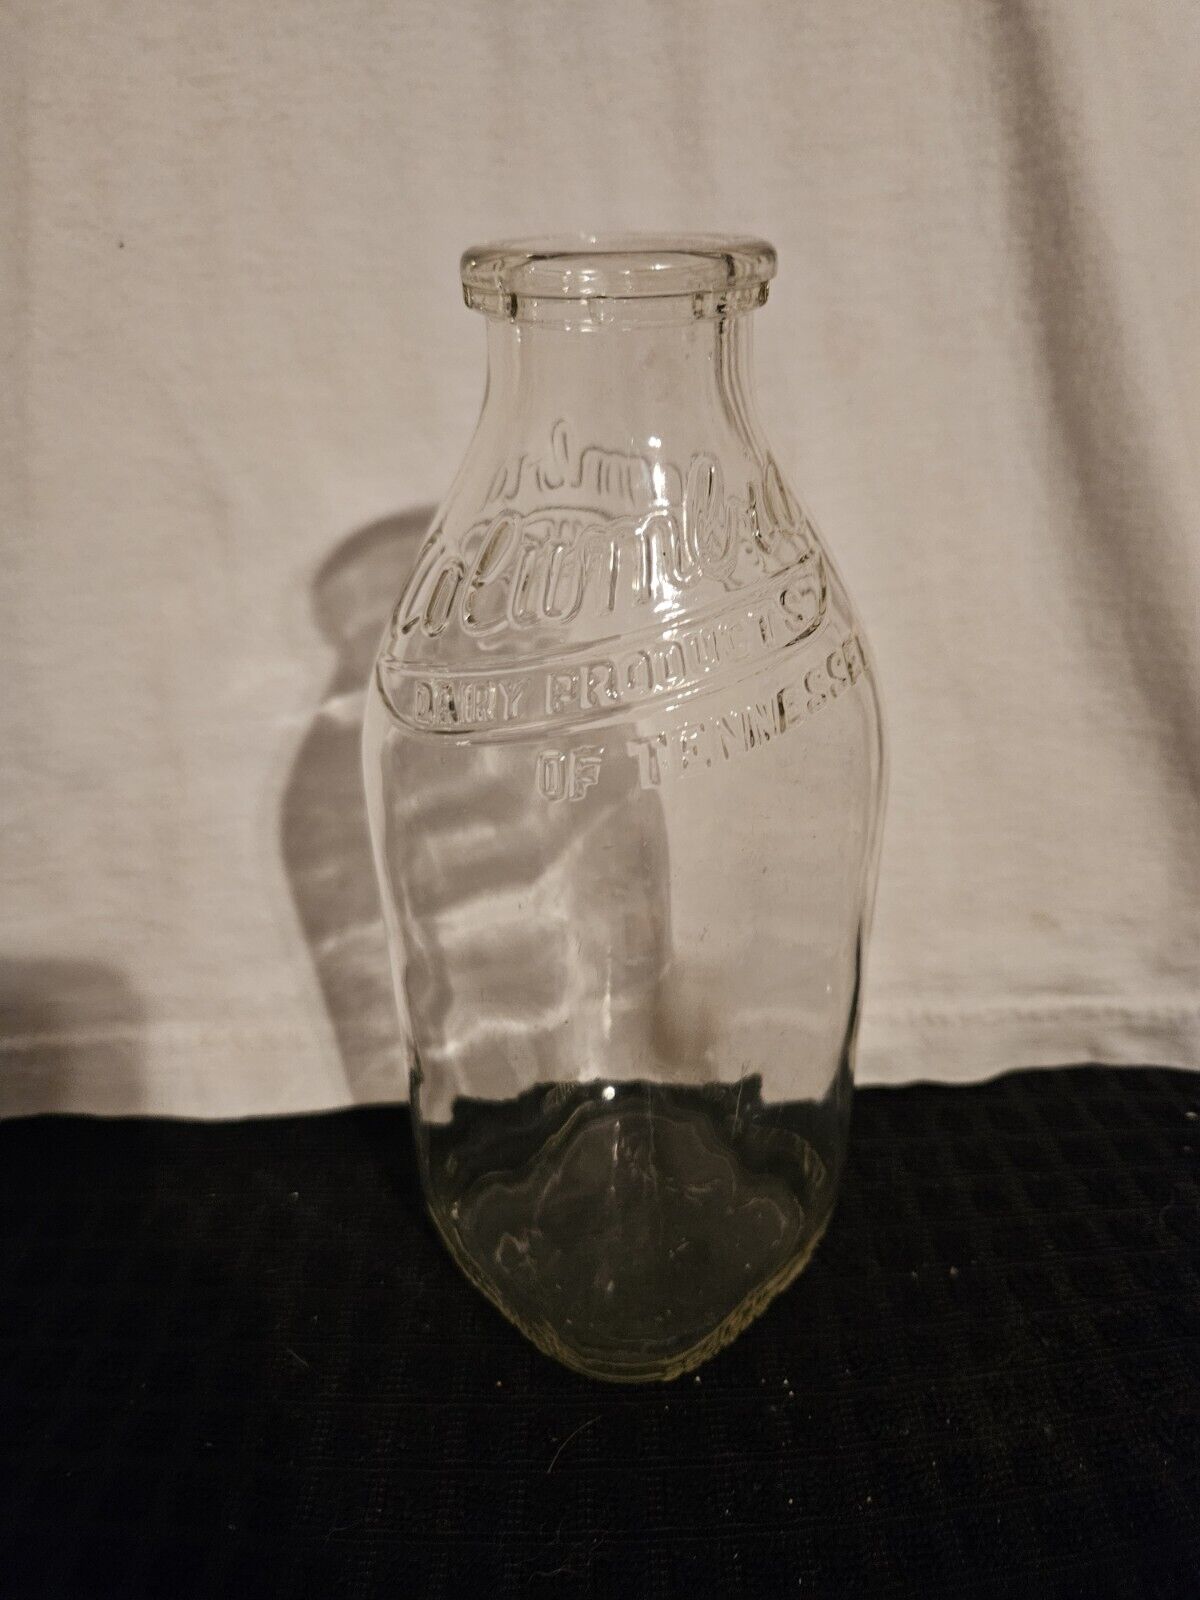 Vintage Columbia Dairy Products Of Tennessee Milk Bottle